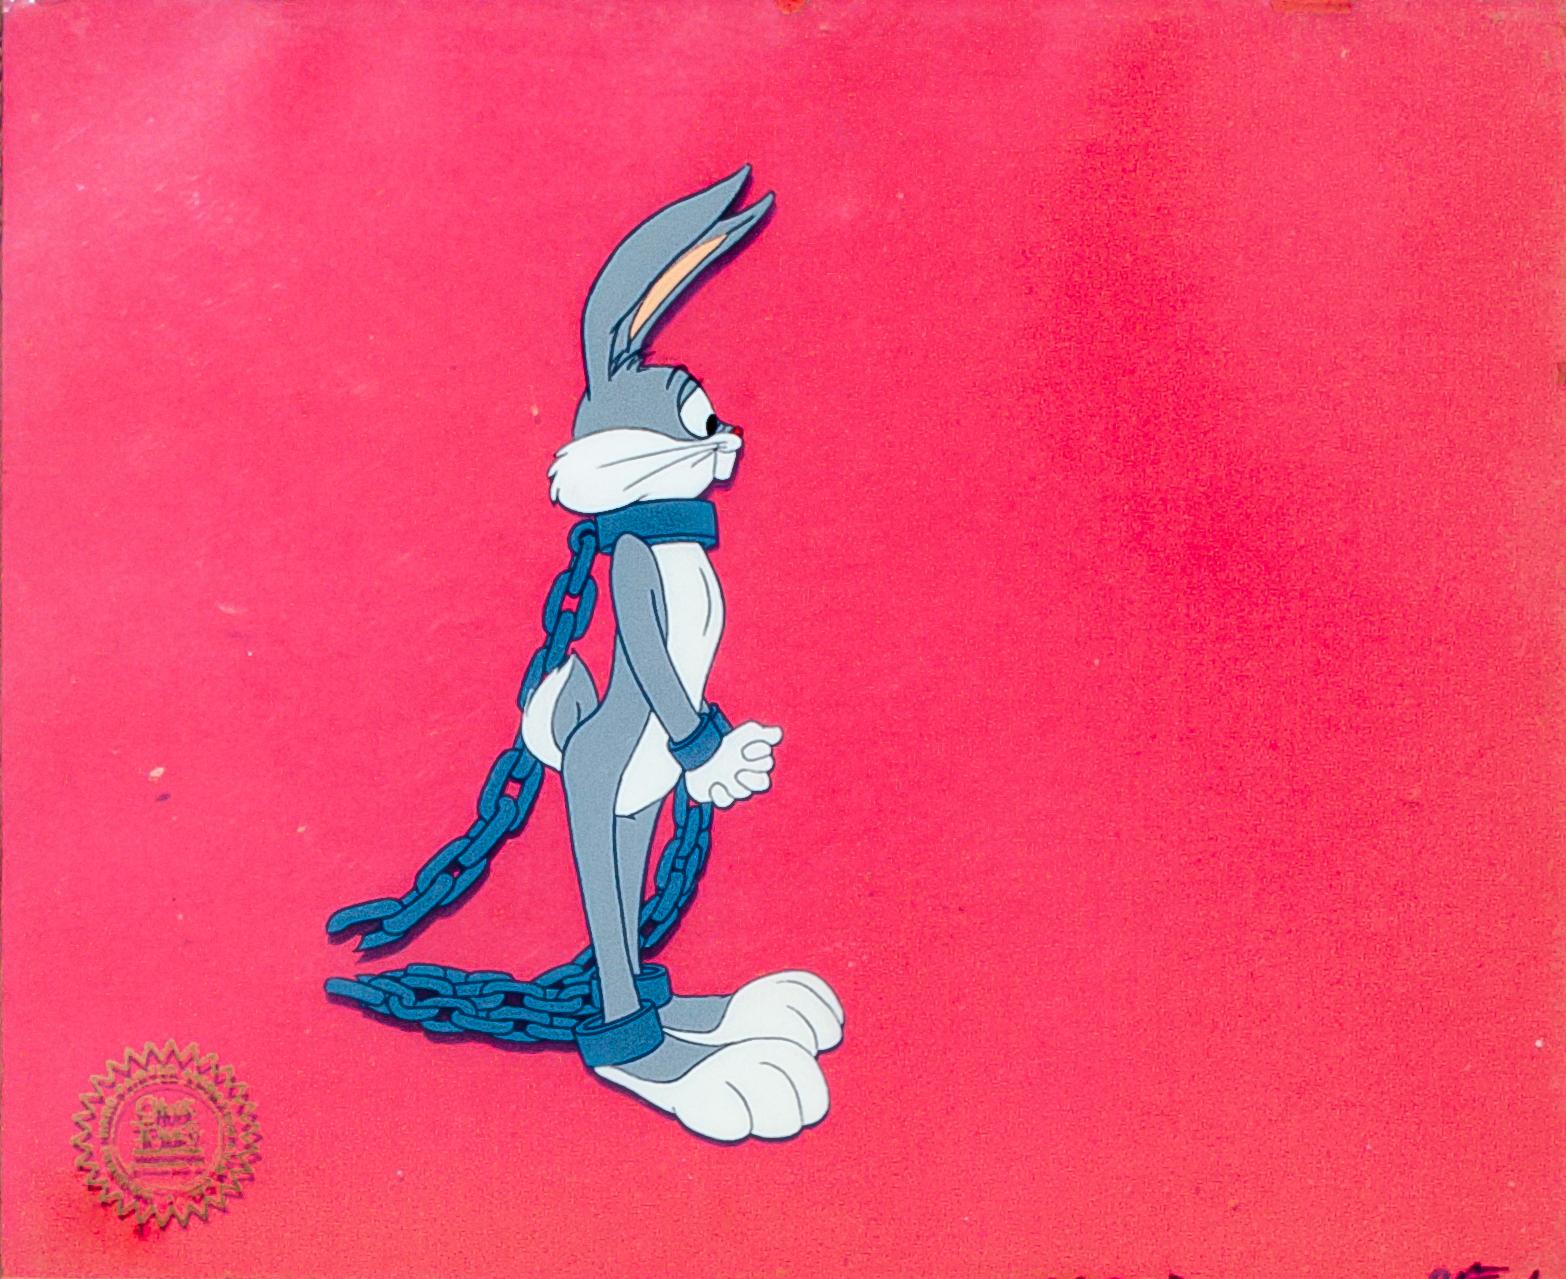 Bugs Bunny is a famous cartoon character - Looney Tunes, Bugs Bunny